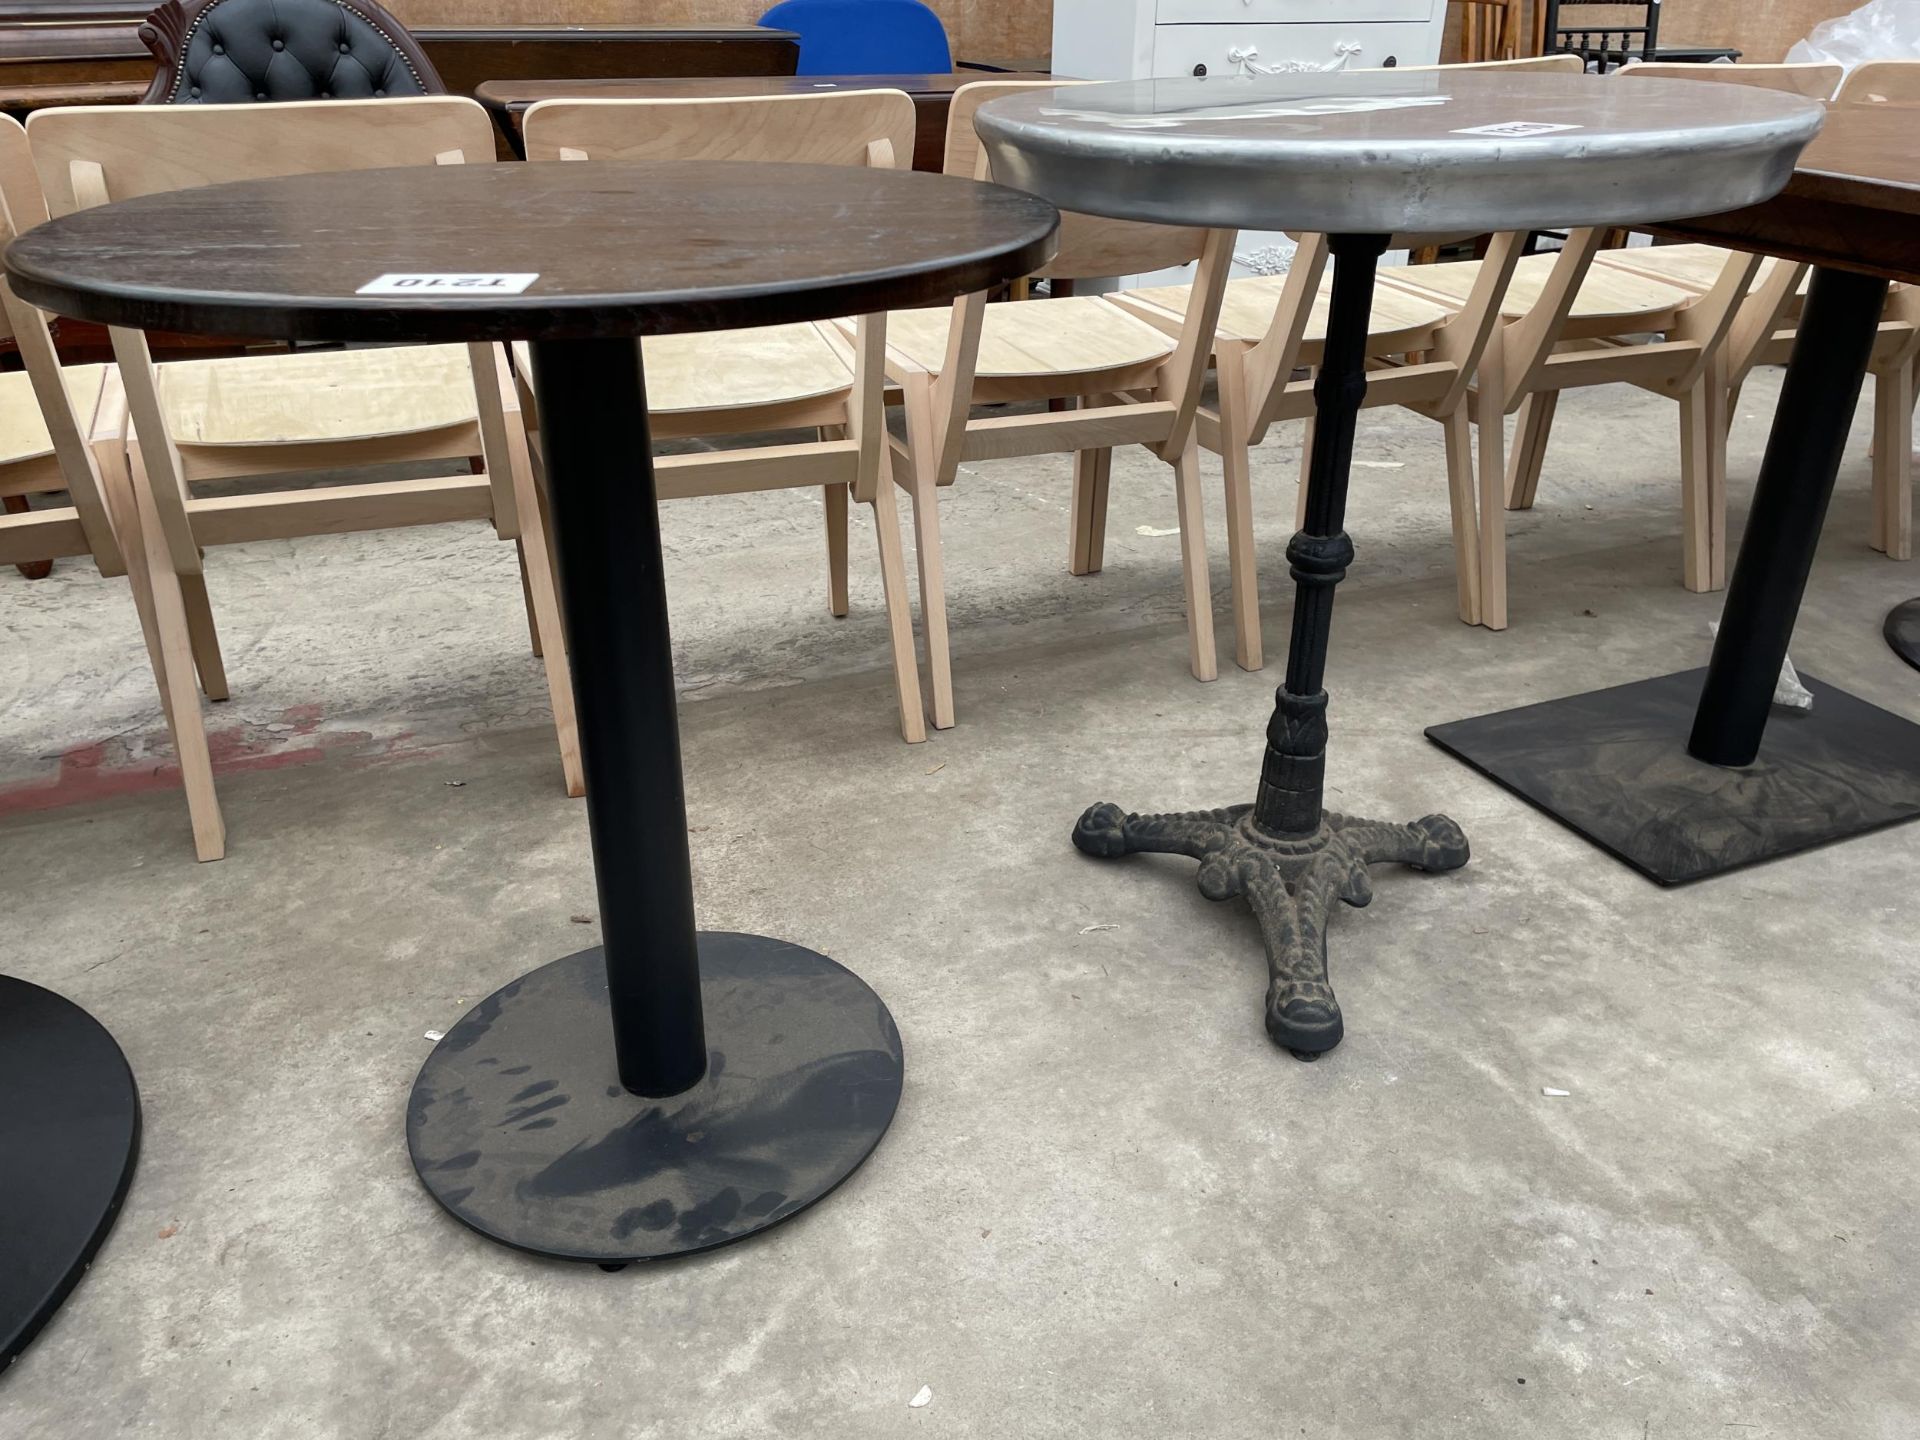 TWO PUB TABLES ONE ON A CAST IRON BASE 25" DIAMETER AND ONE ON A METALWARE BASE 26" DIAMETER - Image 2 of 2